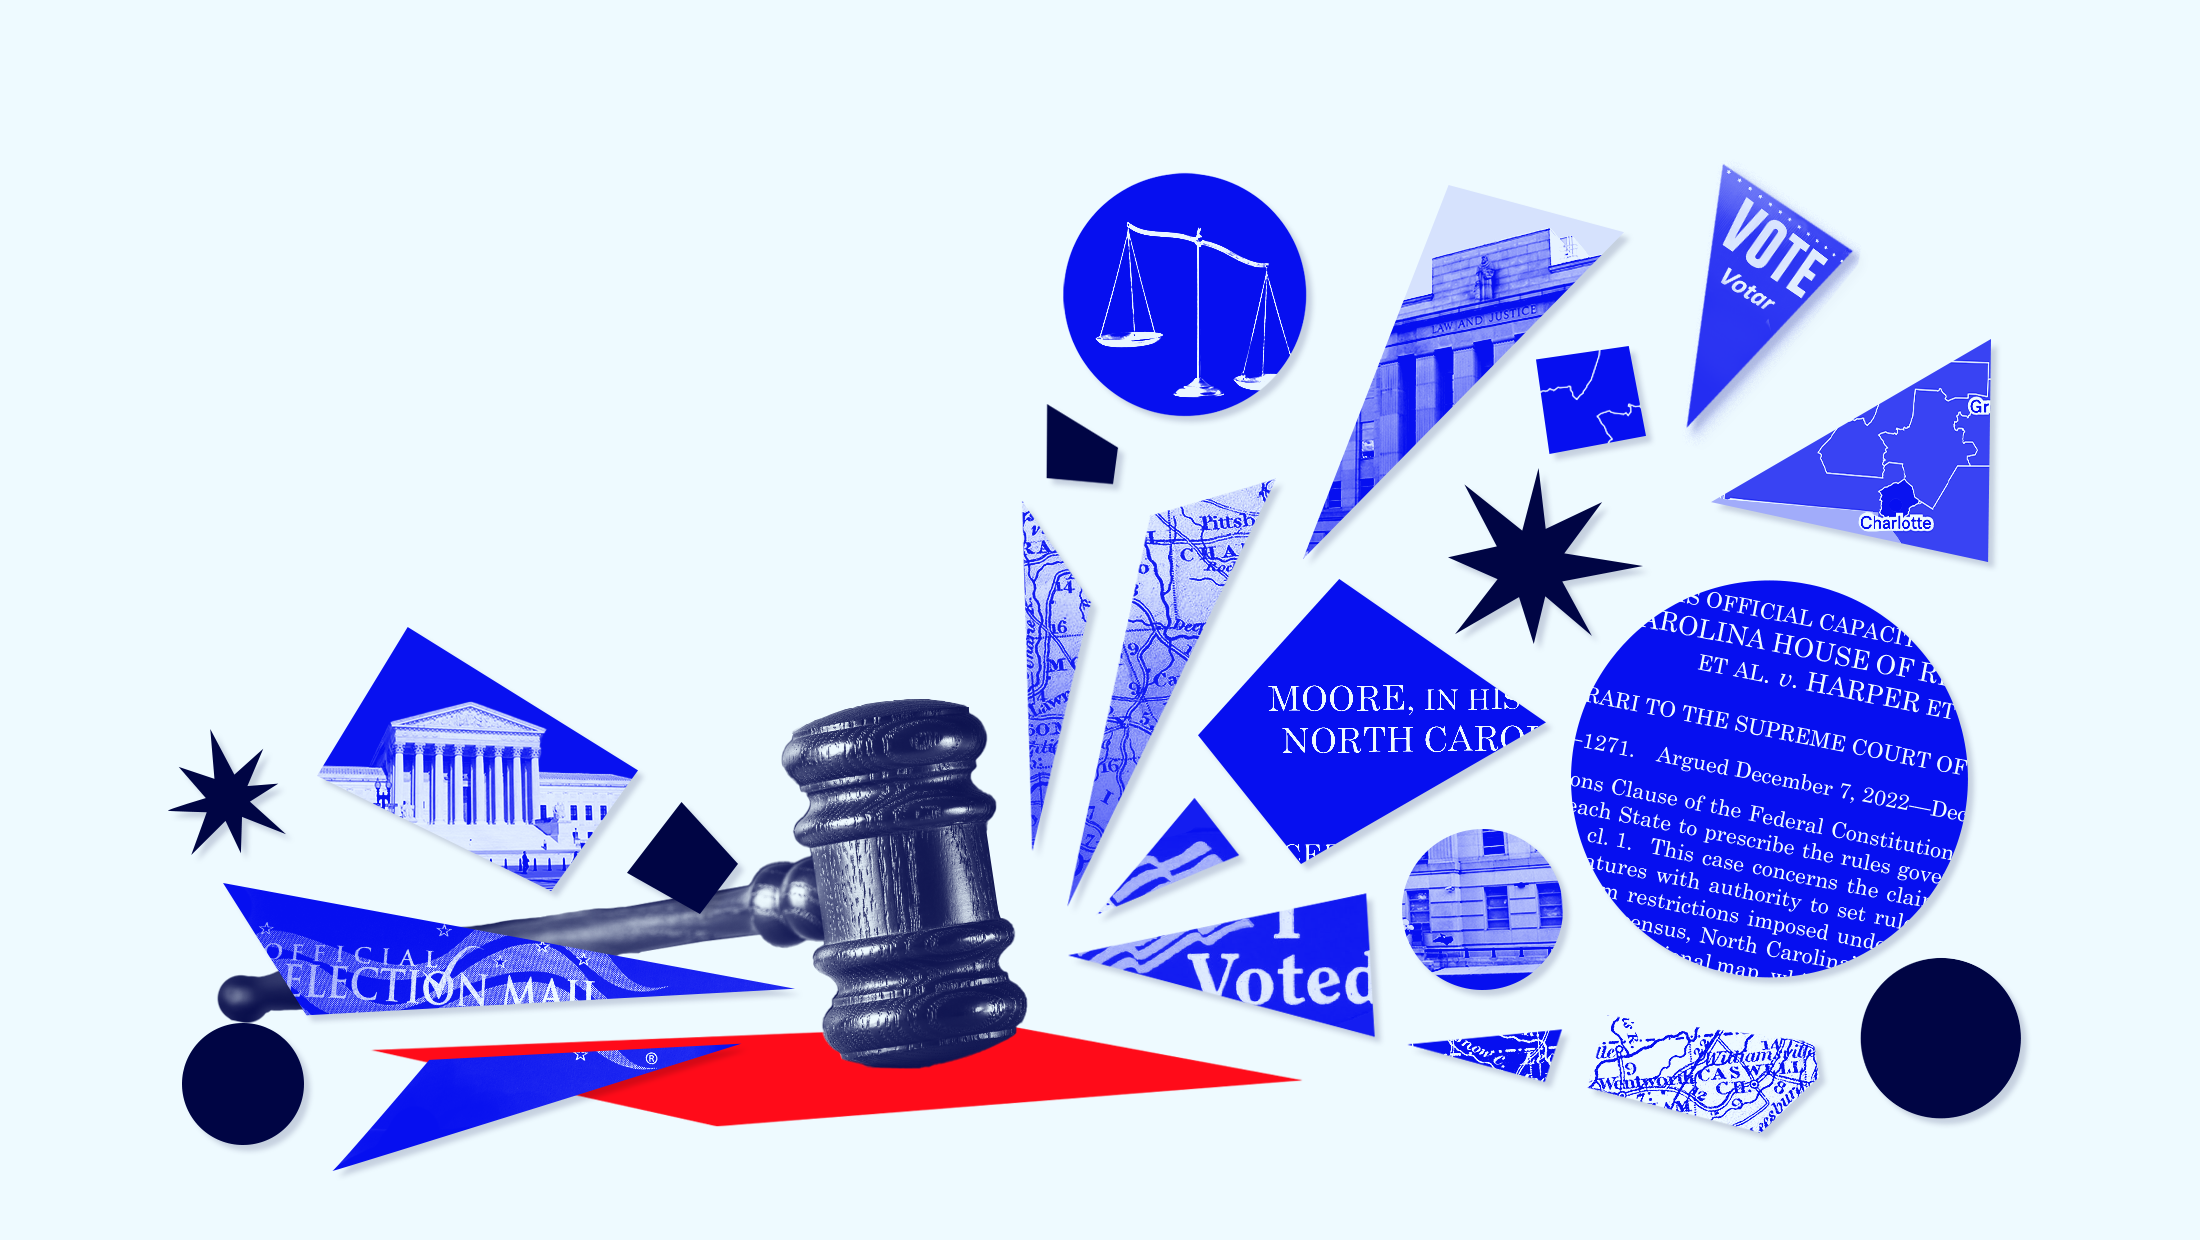 Light blue background showing a gavel banging with shards of lighter blue surrounding the gavel depicting the North Carolina congressional maps, "I Voted" sticker, US Supreme Court building and snippets from the Moore v Harper opinion.